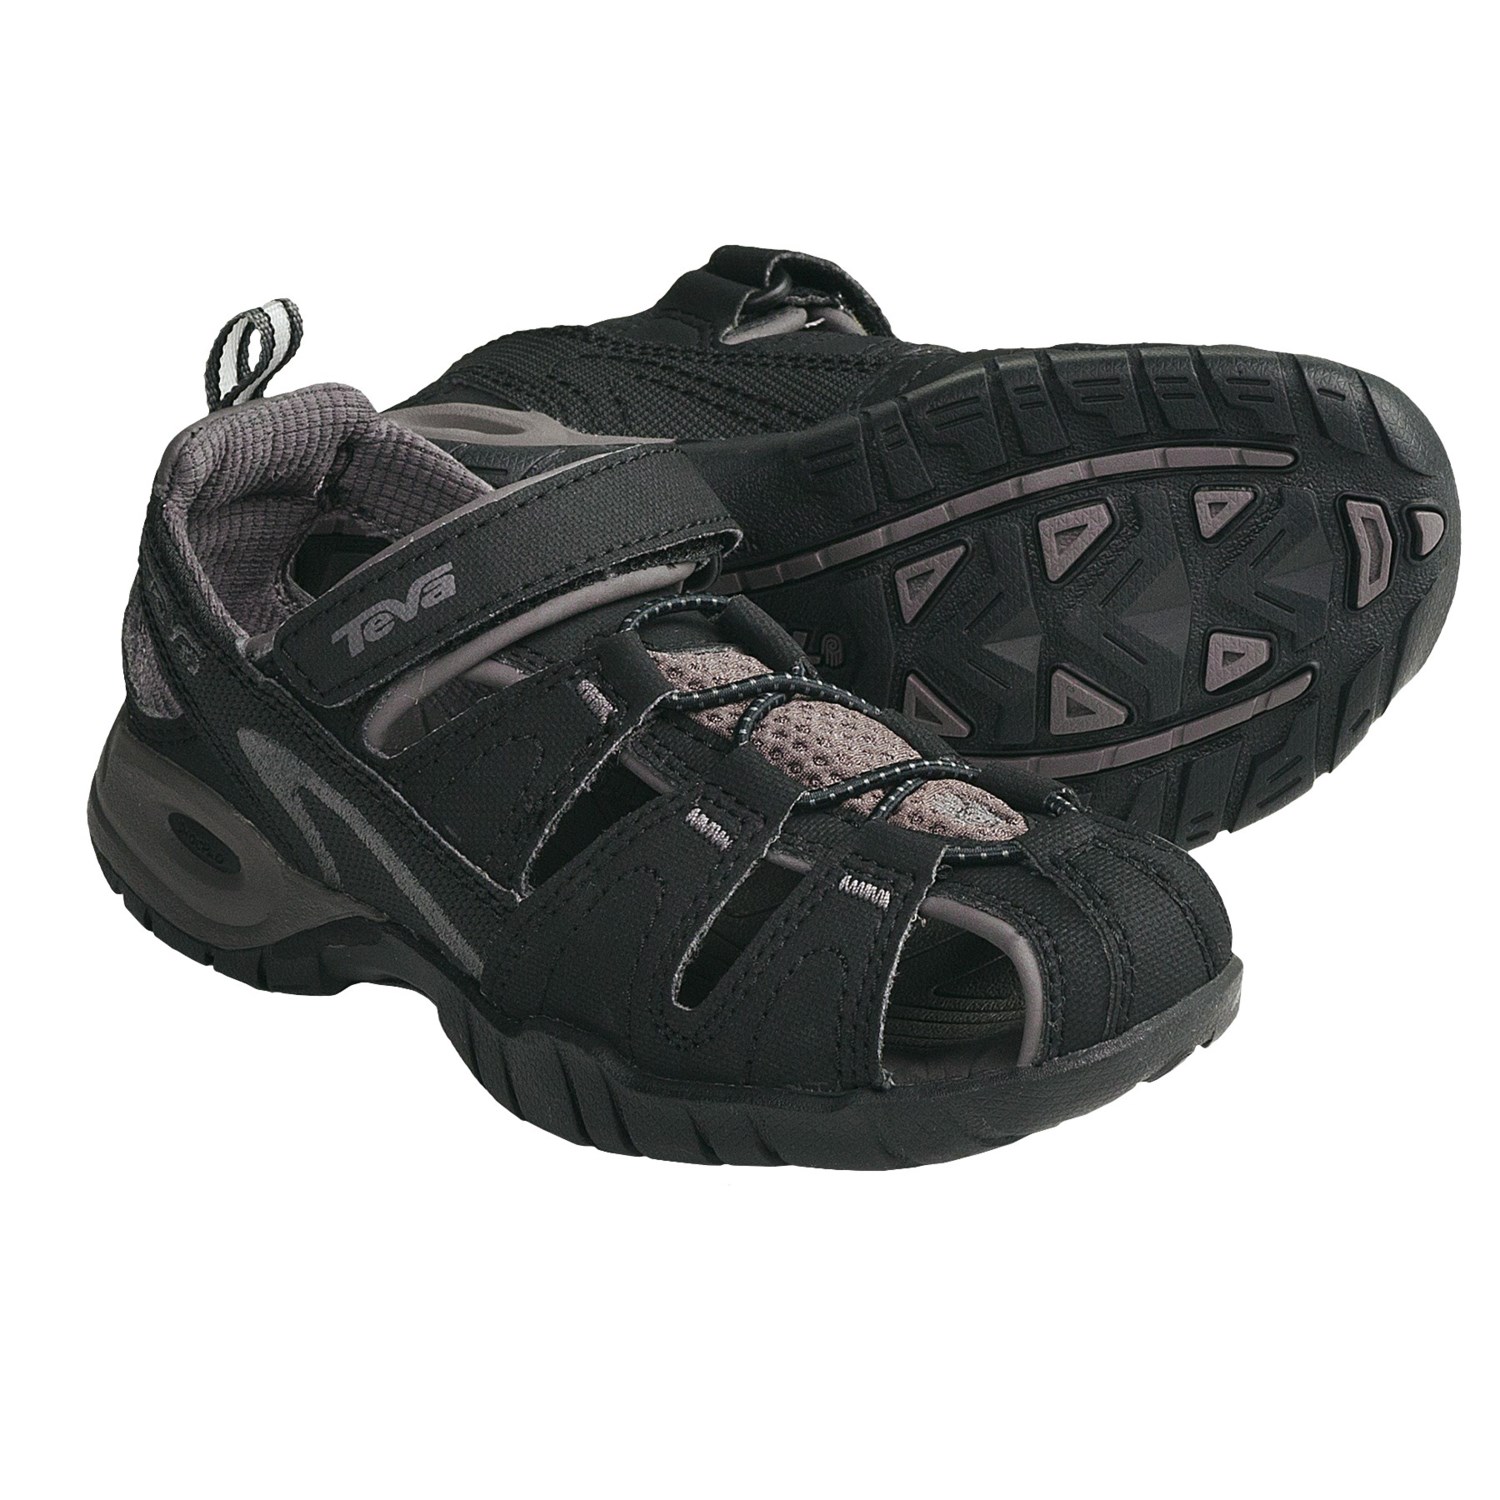 teva-dozer-3-sandals-for-kids-and-youth-in-black~p~4133y_03~1500.2.jpg